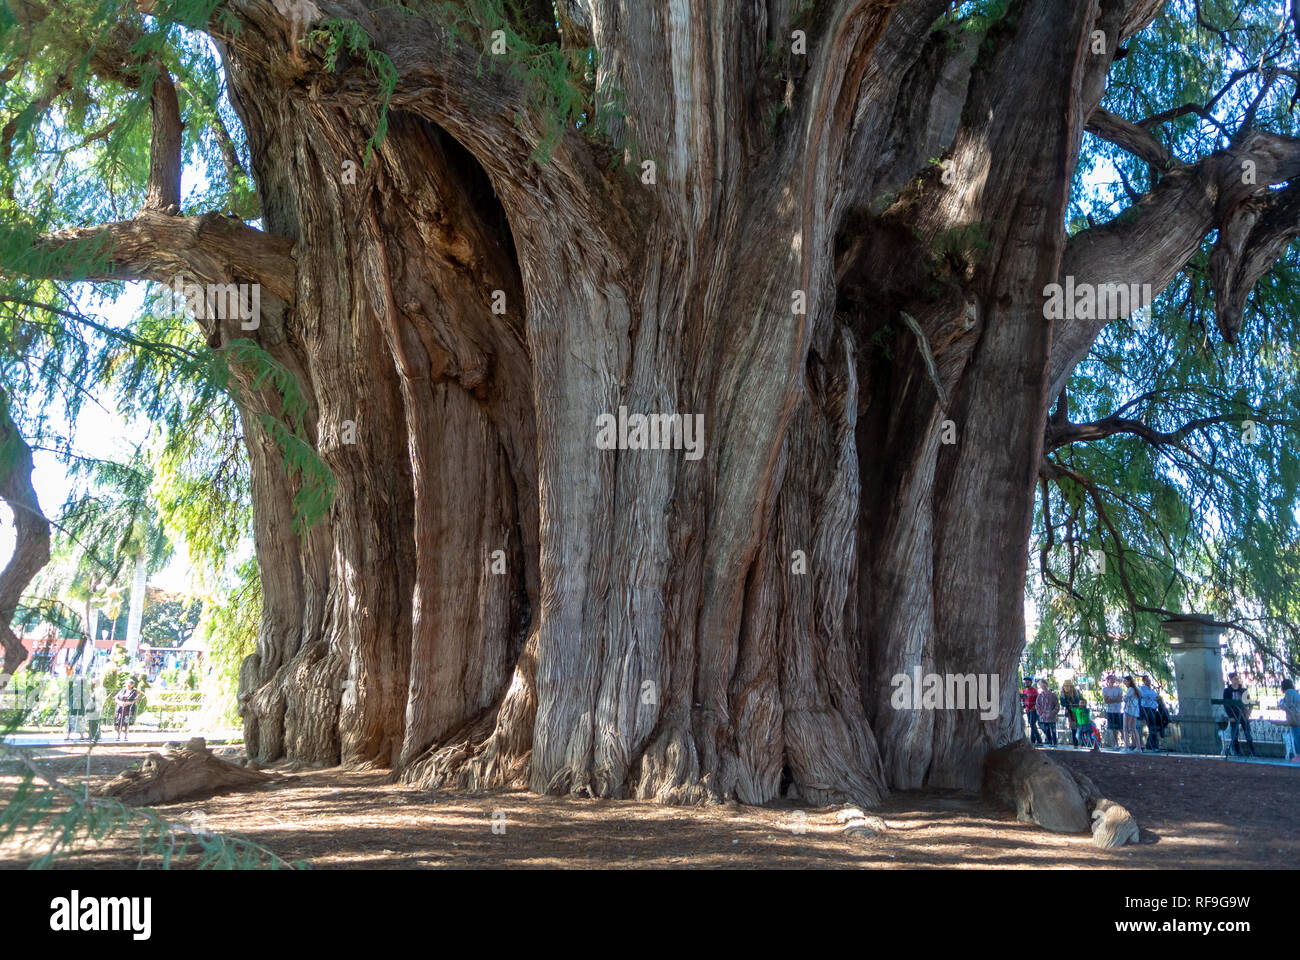 Tree of Life, the widest tree in the world, El Tule, Oaxaca, Mexico Stock Photo